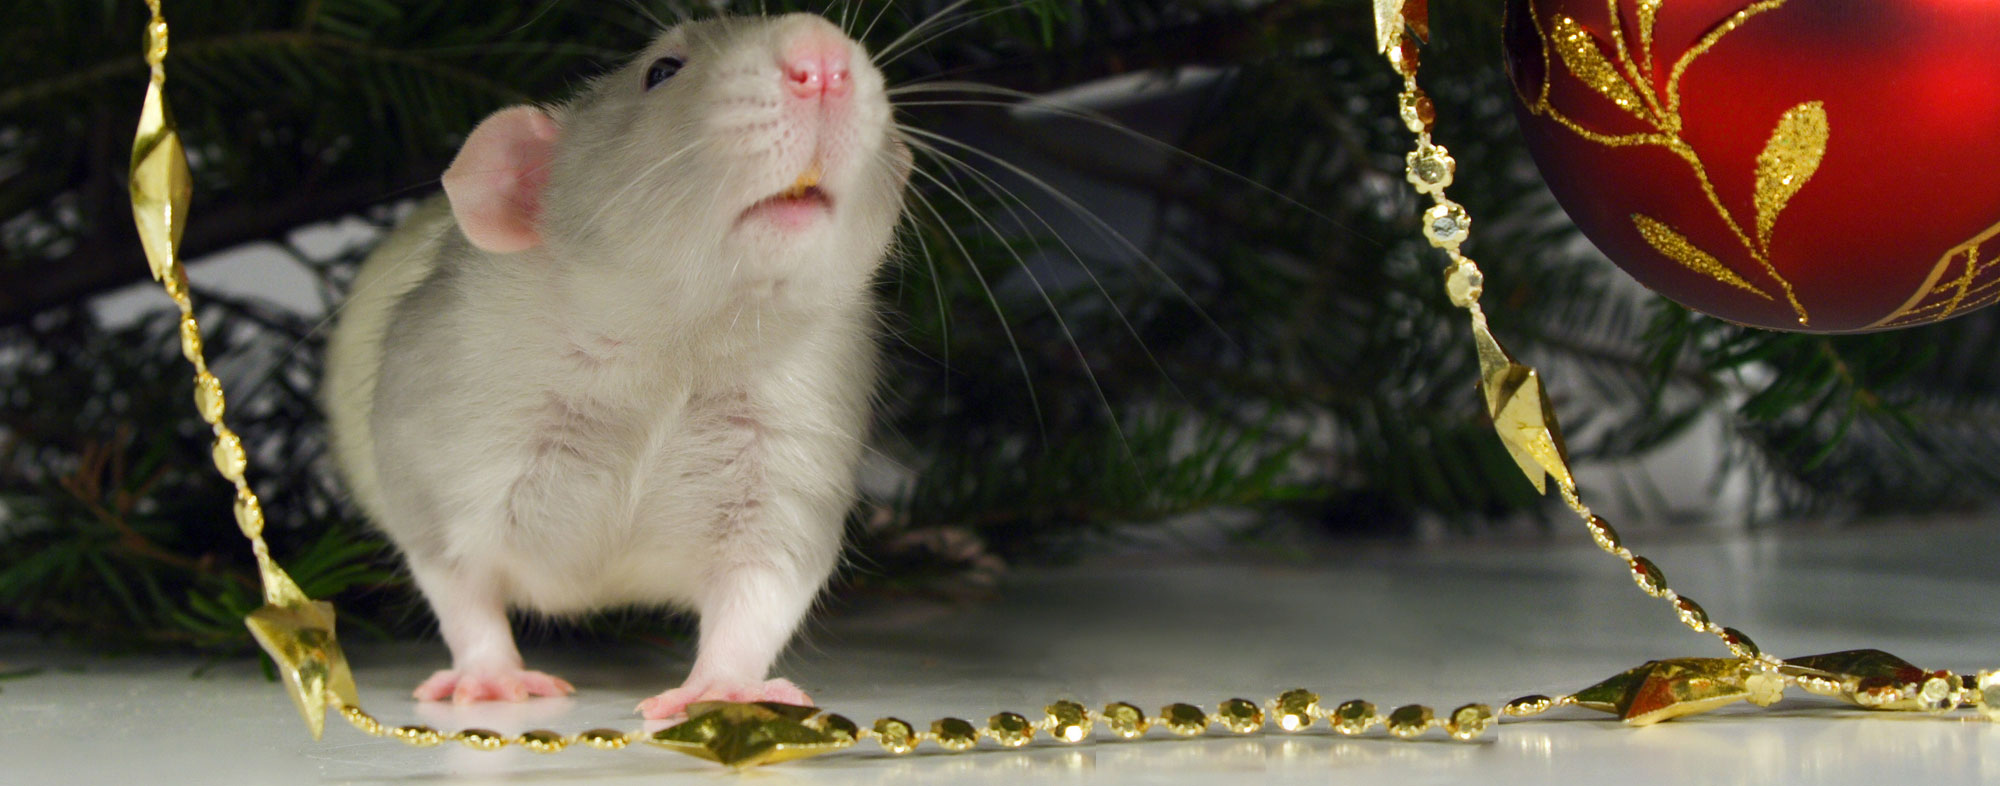 Your pet mouse may want to hide near your Christmas decorations